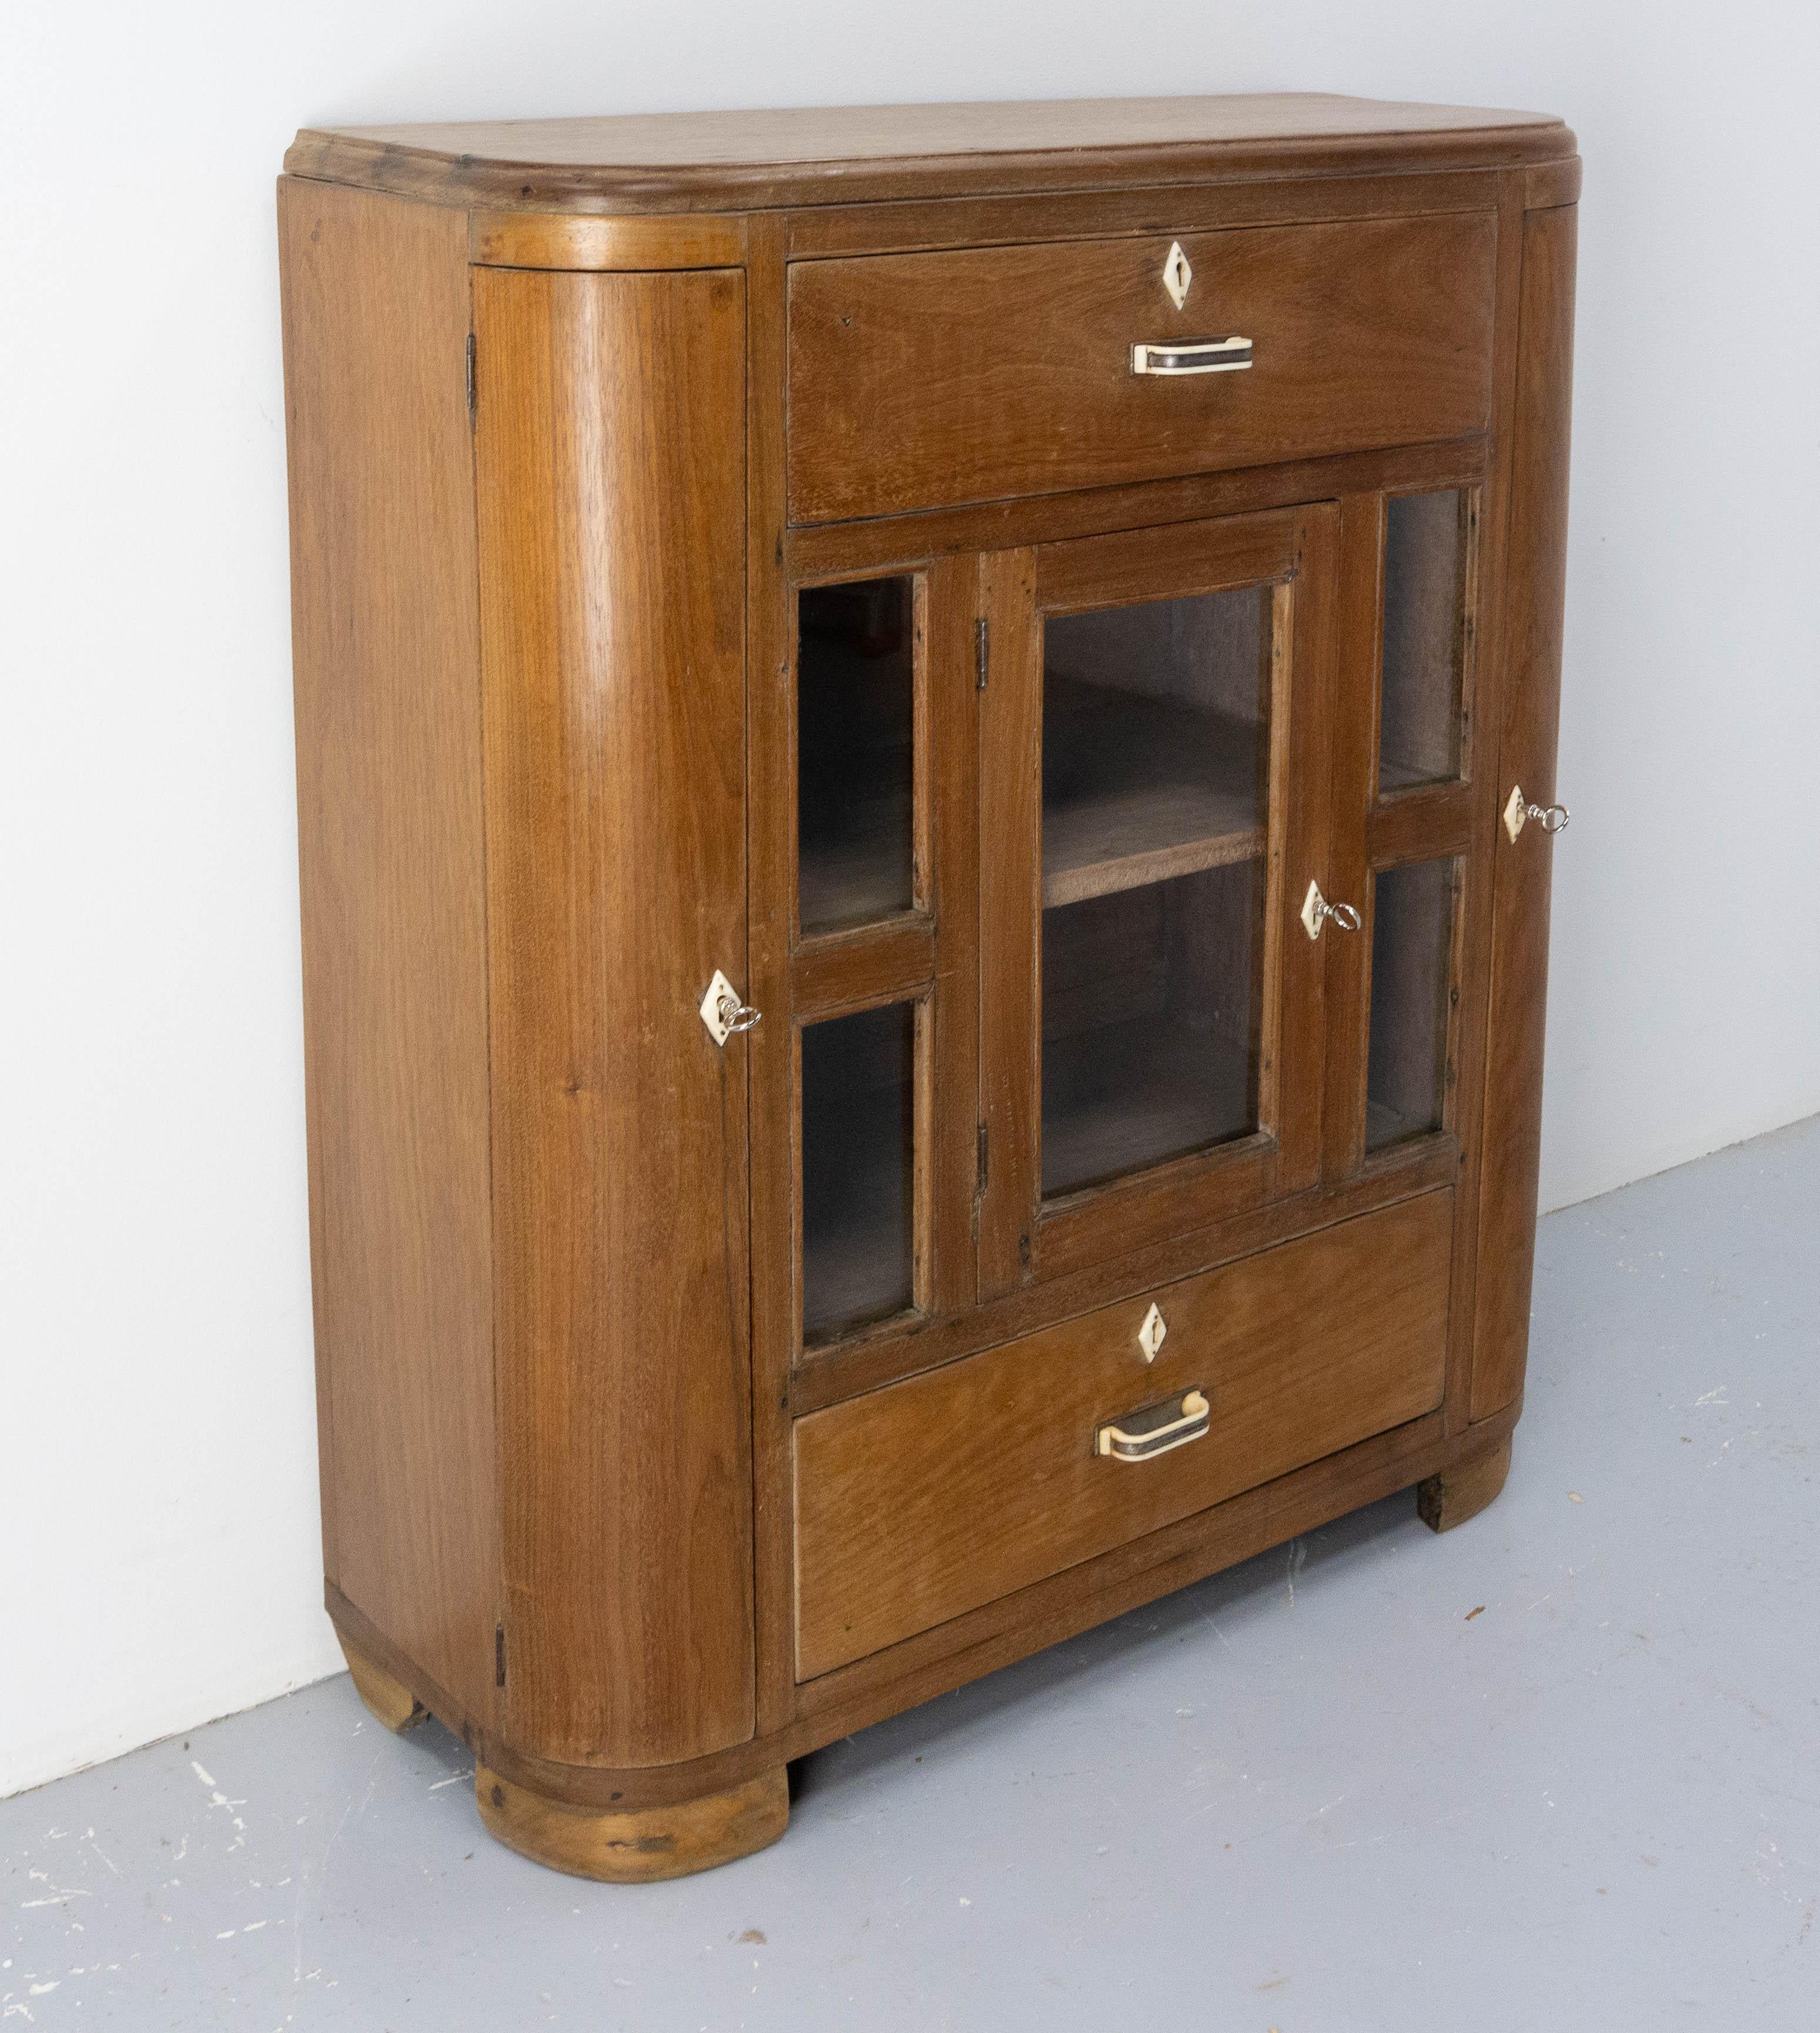 This French cabinet in massive teck with glass vitrine two drawers and two doors is very original with its rounded corners. 

Good condition.

Shipping:
35 / 87 / 102 cm 63 kg.